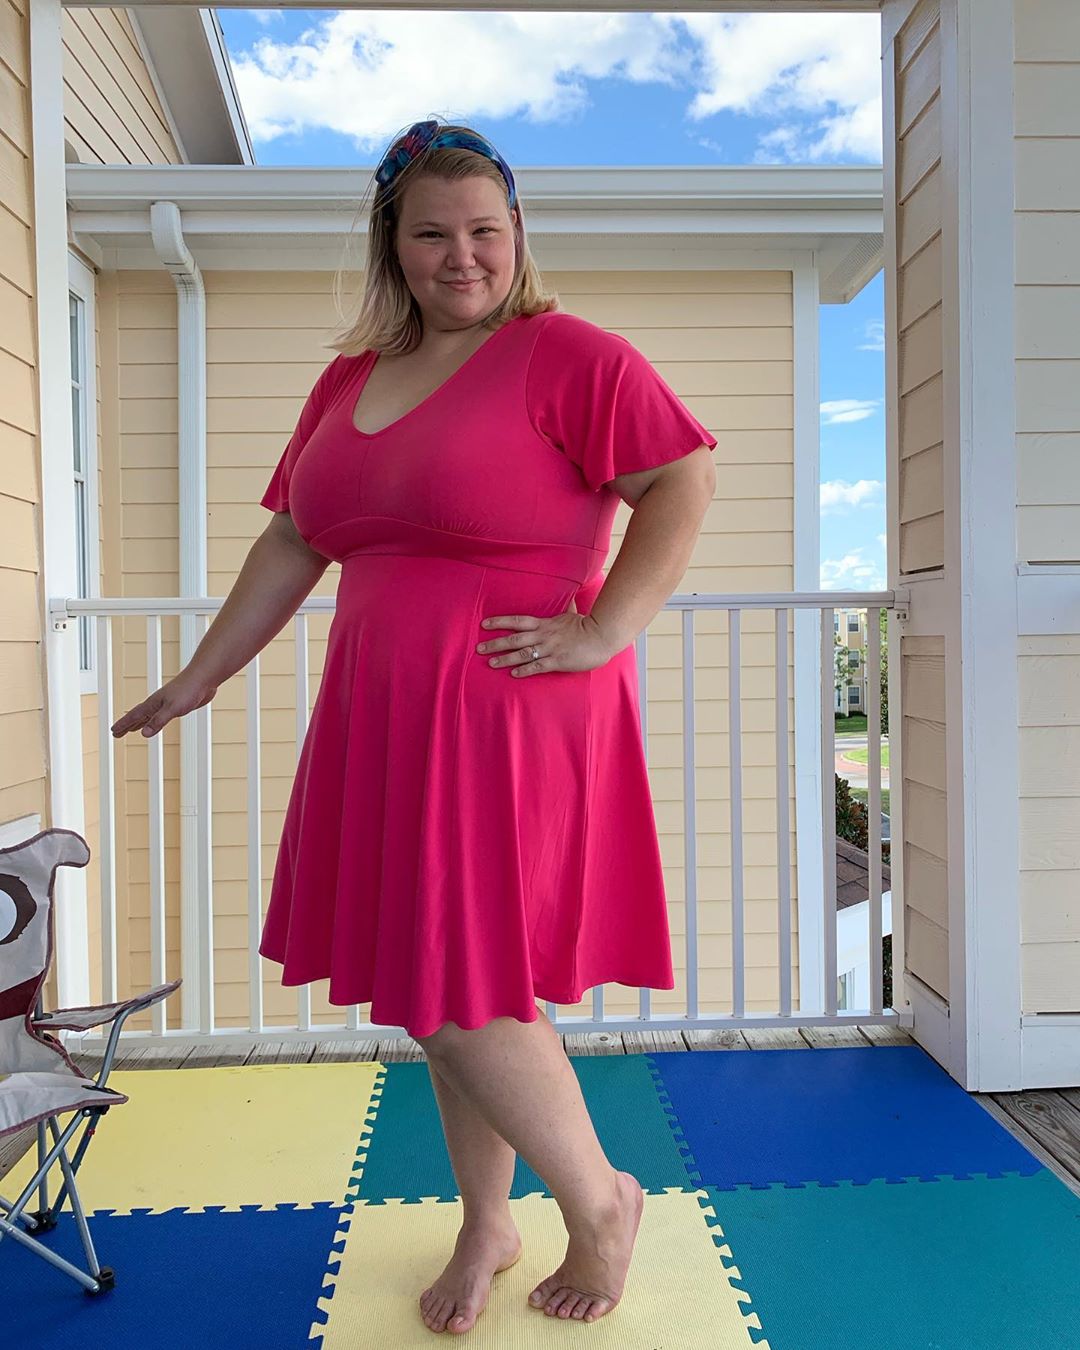 '90 Day Fiance' Nicole Nafziger Weight Loss — New Crop Top Photo